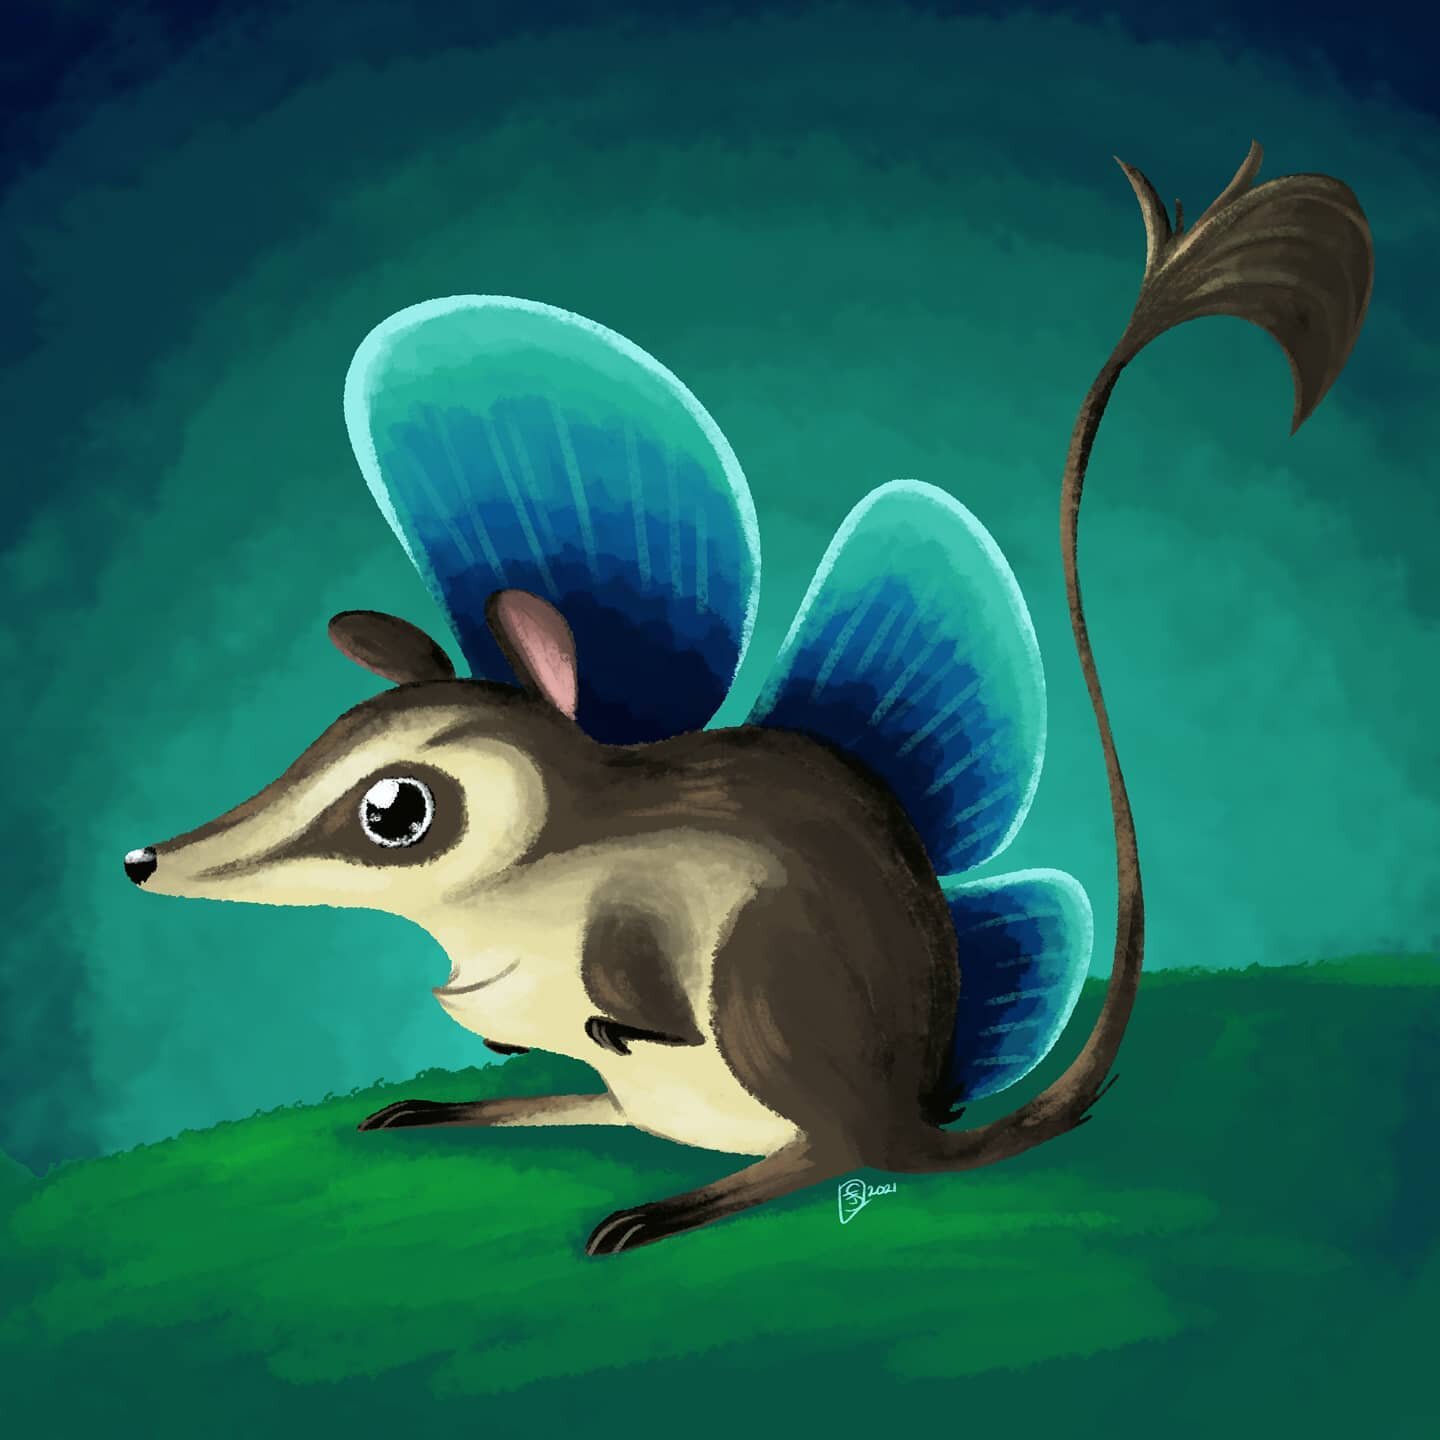 So I LOVED Raya and the Last Dragon!
It was so rich with visuals and environments and design and culture.
I especially adore what I have been informed by an inside source was called the Mouse Dragon, these adorable little tree mouse creatures who inf